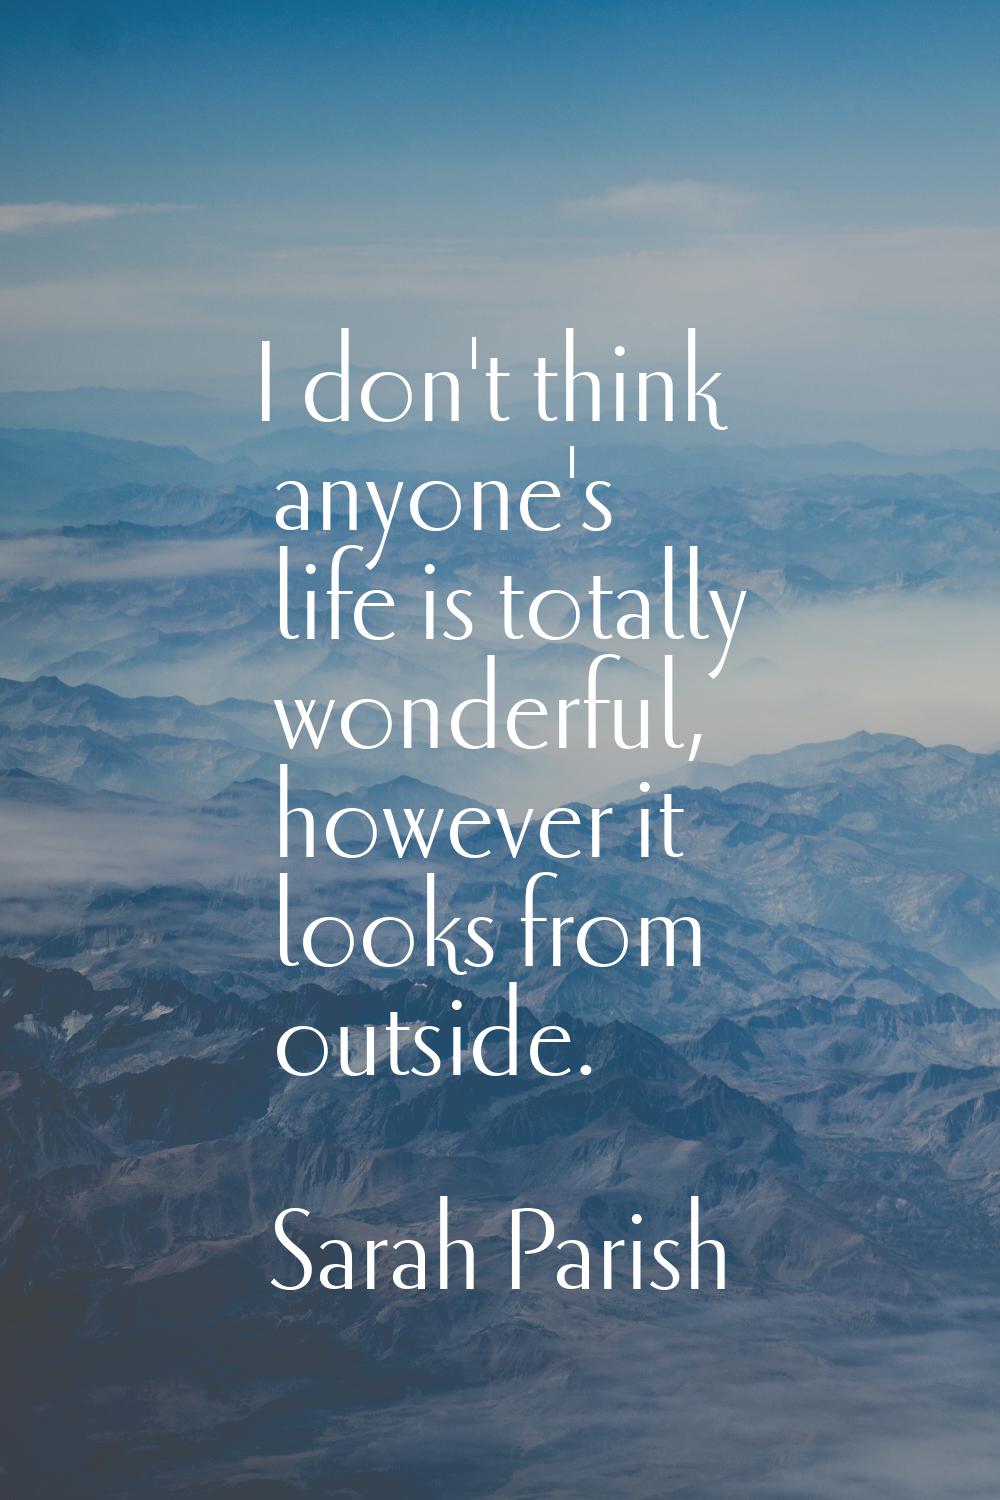 I don't think anyone's life is totally wonderful, however it looks from outside.